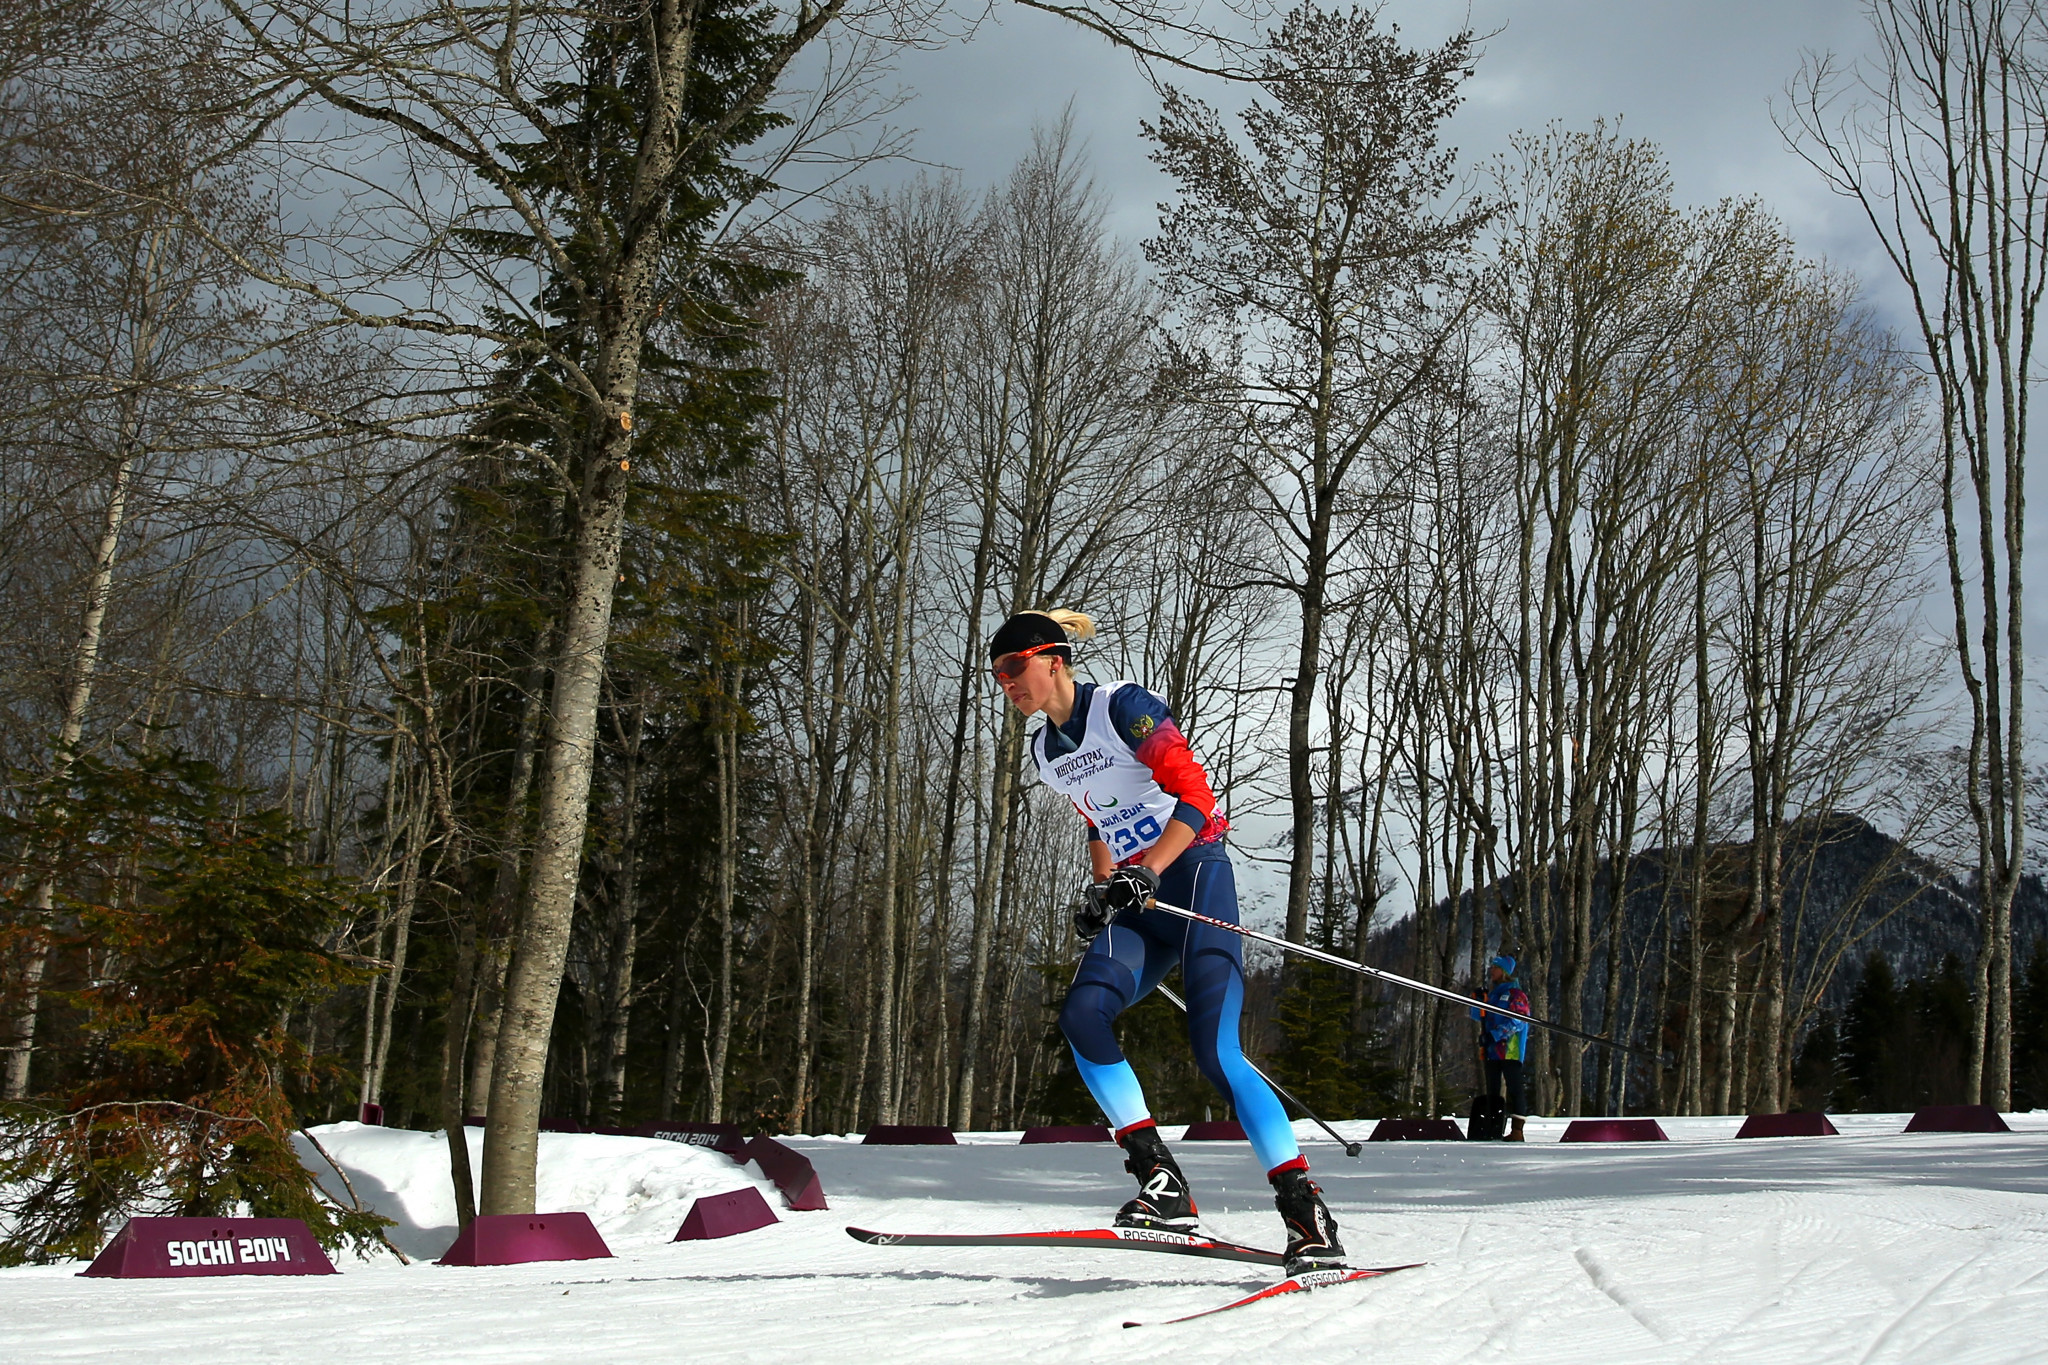 Russian athletes competing as neutrals dominated the penultimate day of the World Para Nordic Skiing World Cup in Oberried by winning five of the six biathlon races ©Getty Images